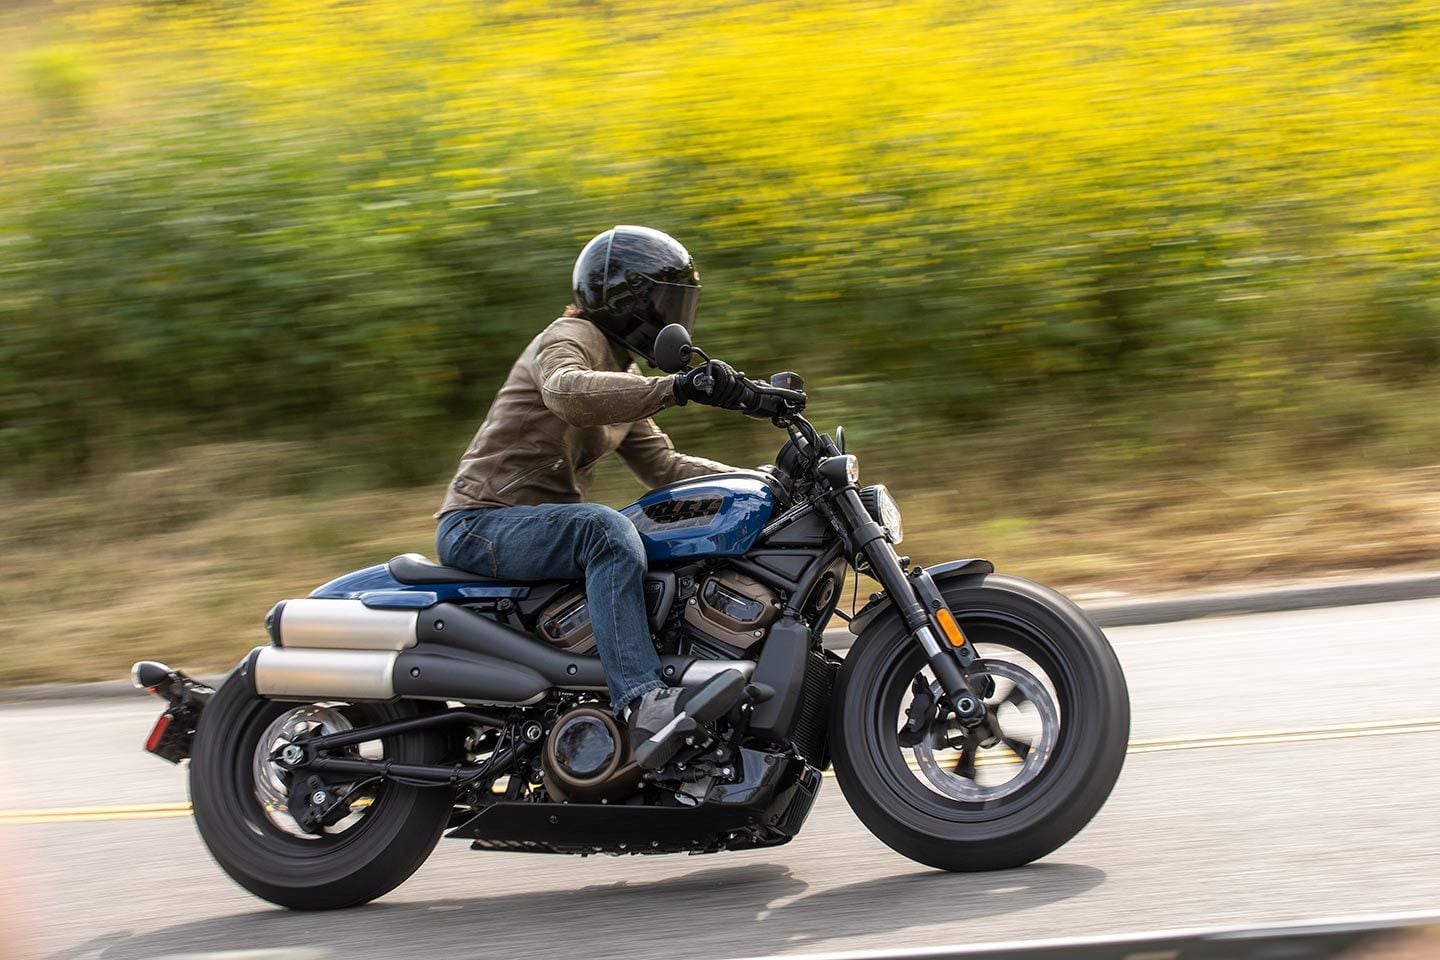 2023 Harley-Davidson Sportster S Review | Cycle World